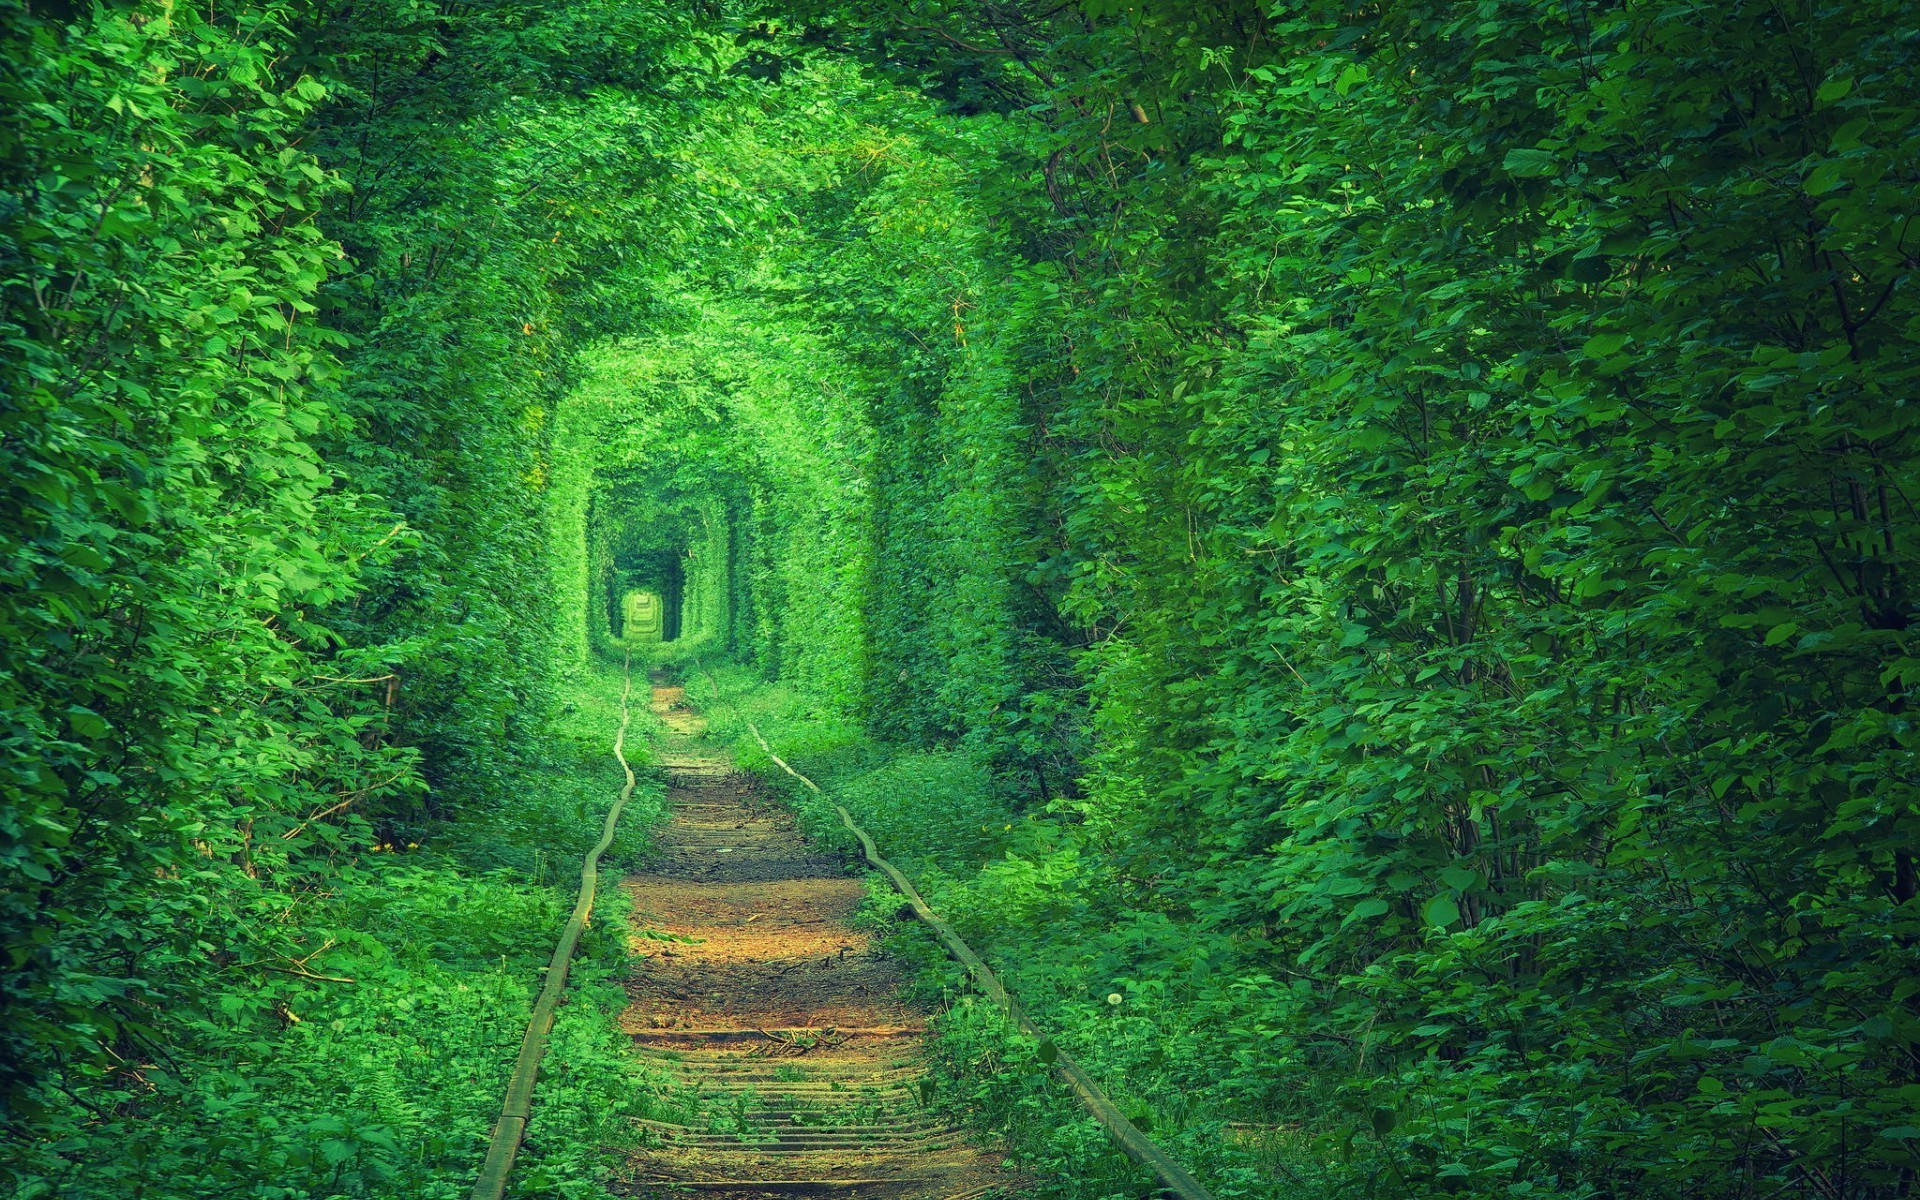 Green Trees By The Railway